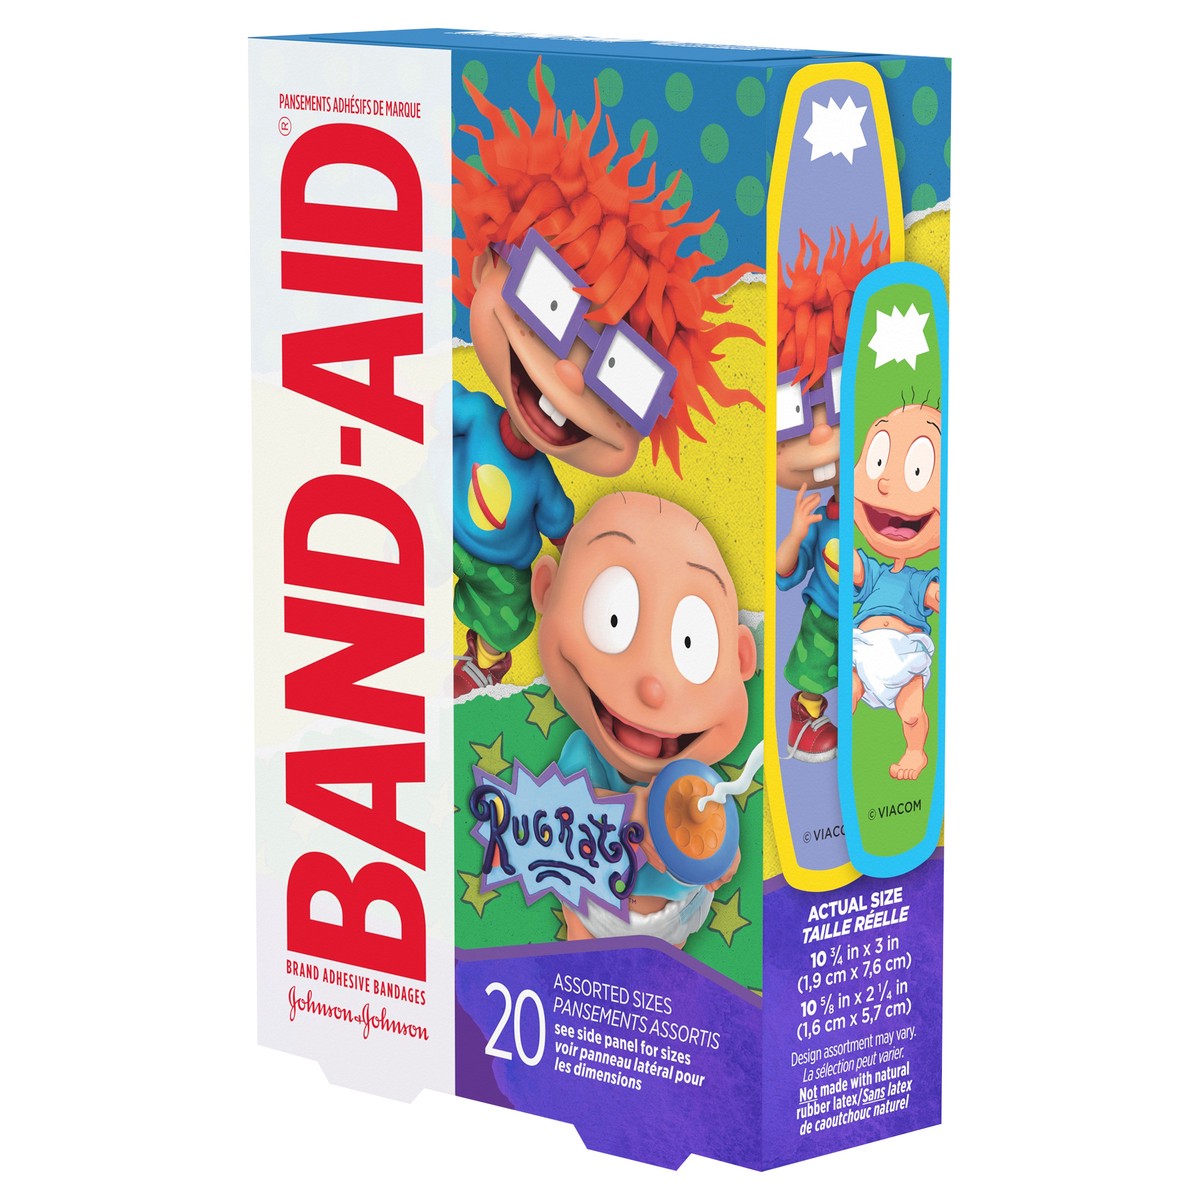 slide 5 of 8, BAND-AID Adhesive Bandages for Minor Cuts & Scrapes, Wound Care Featuring Nickelodeon Rugrats Characters, Fun Bandages for Kids and Toddlers, Assorted Sizes 20 Count, 20 ct